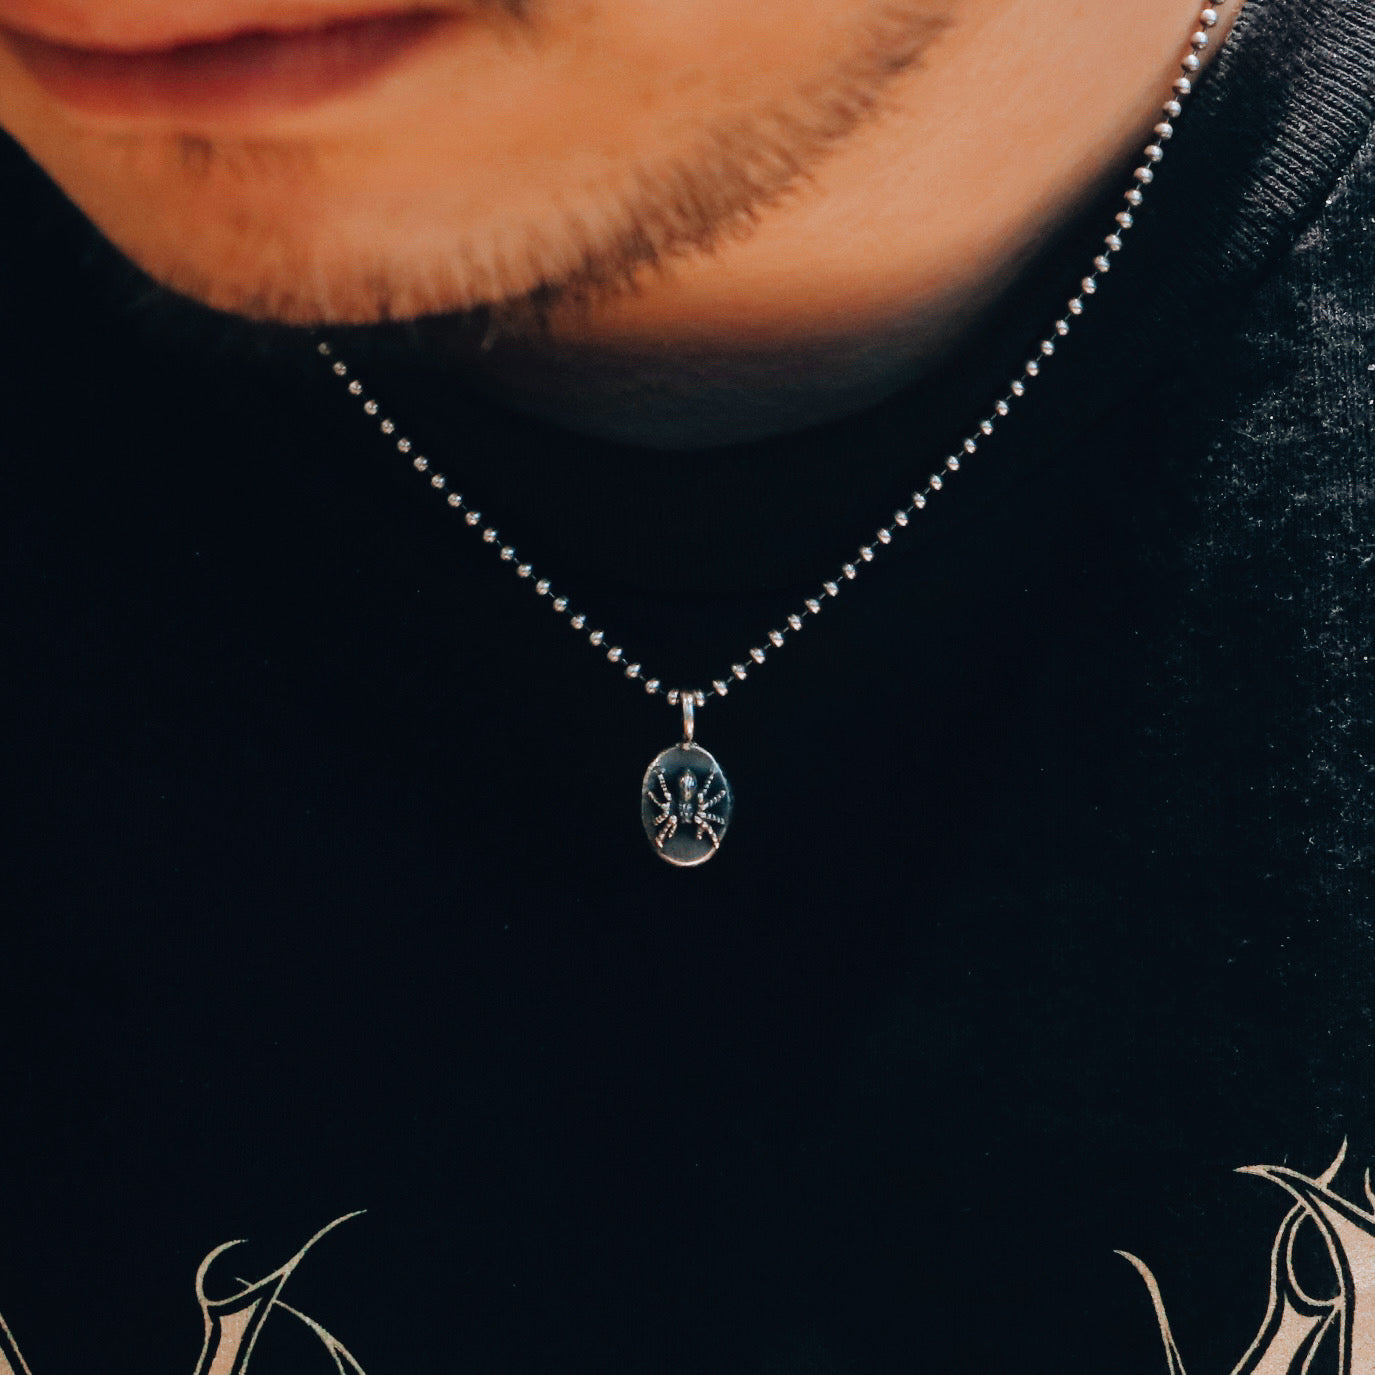 Spider Charm ( With SV Chain )